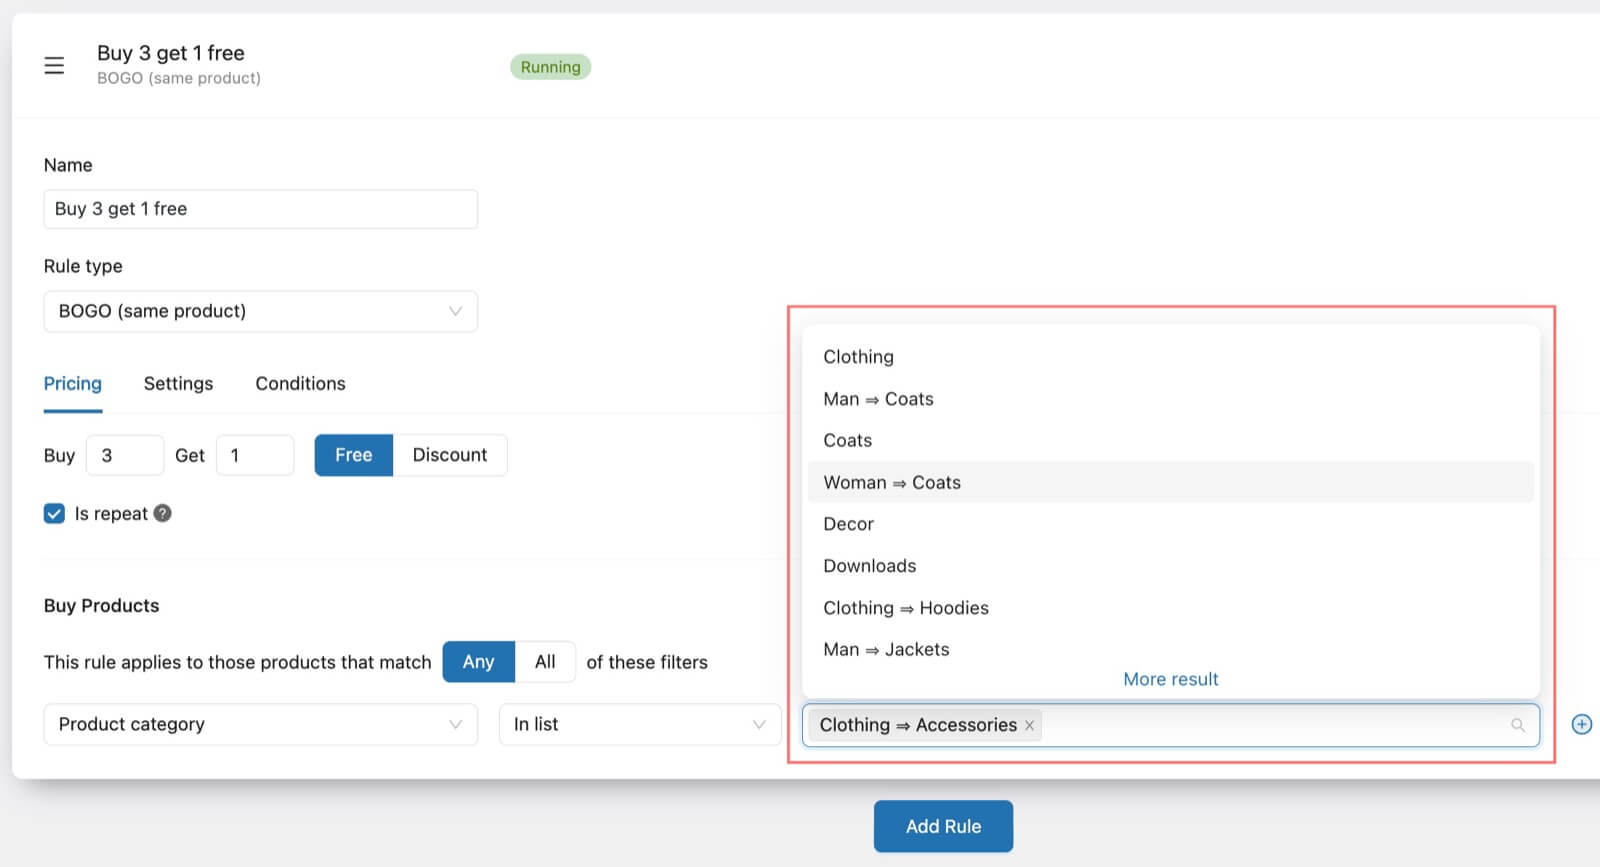 Select product category and subcategory in product filter